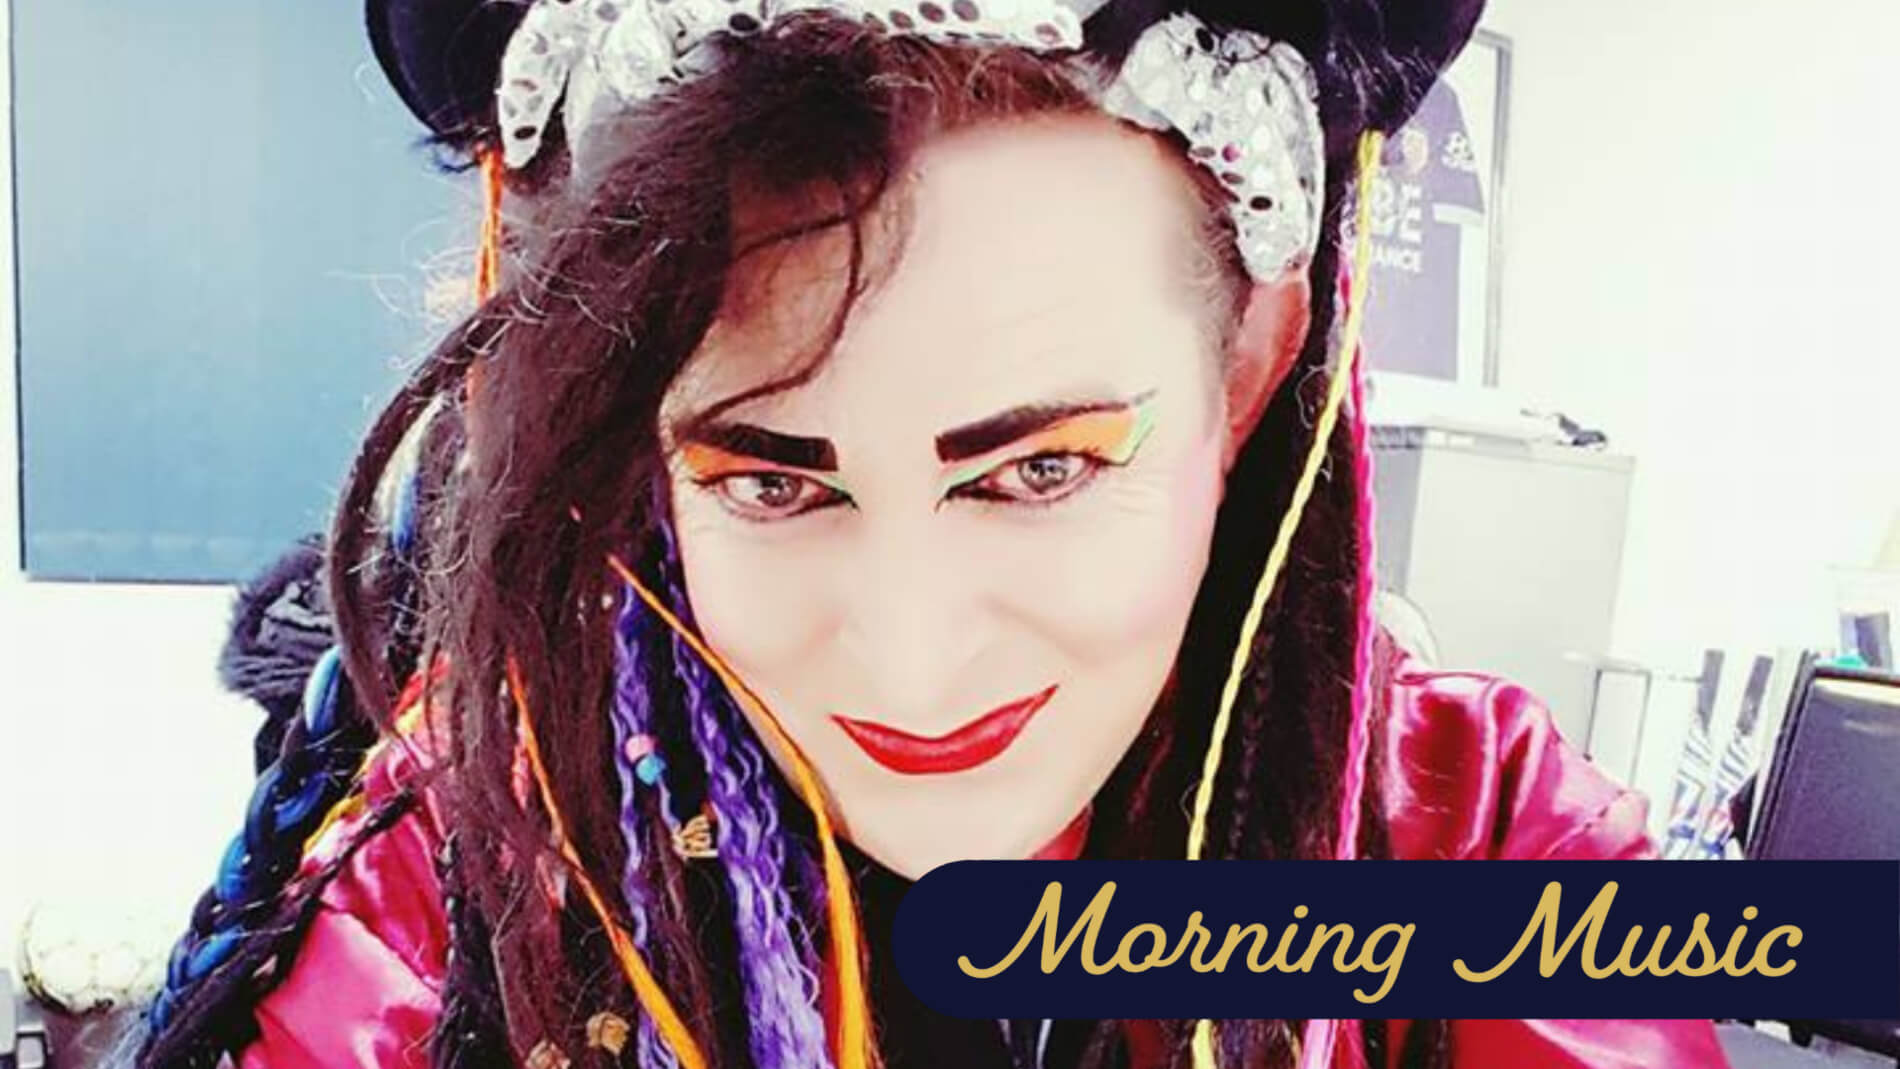 The Boy George Show featuring in our October 2022 Morning Music Show